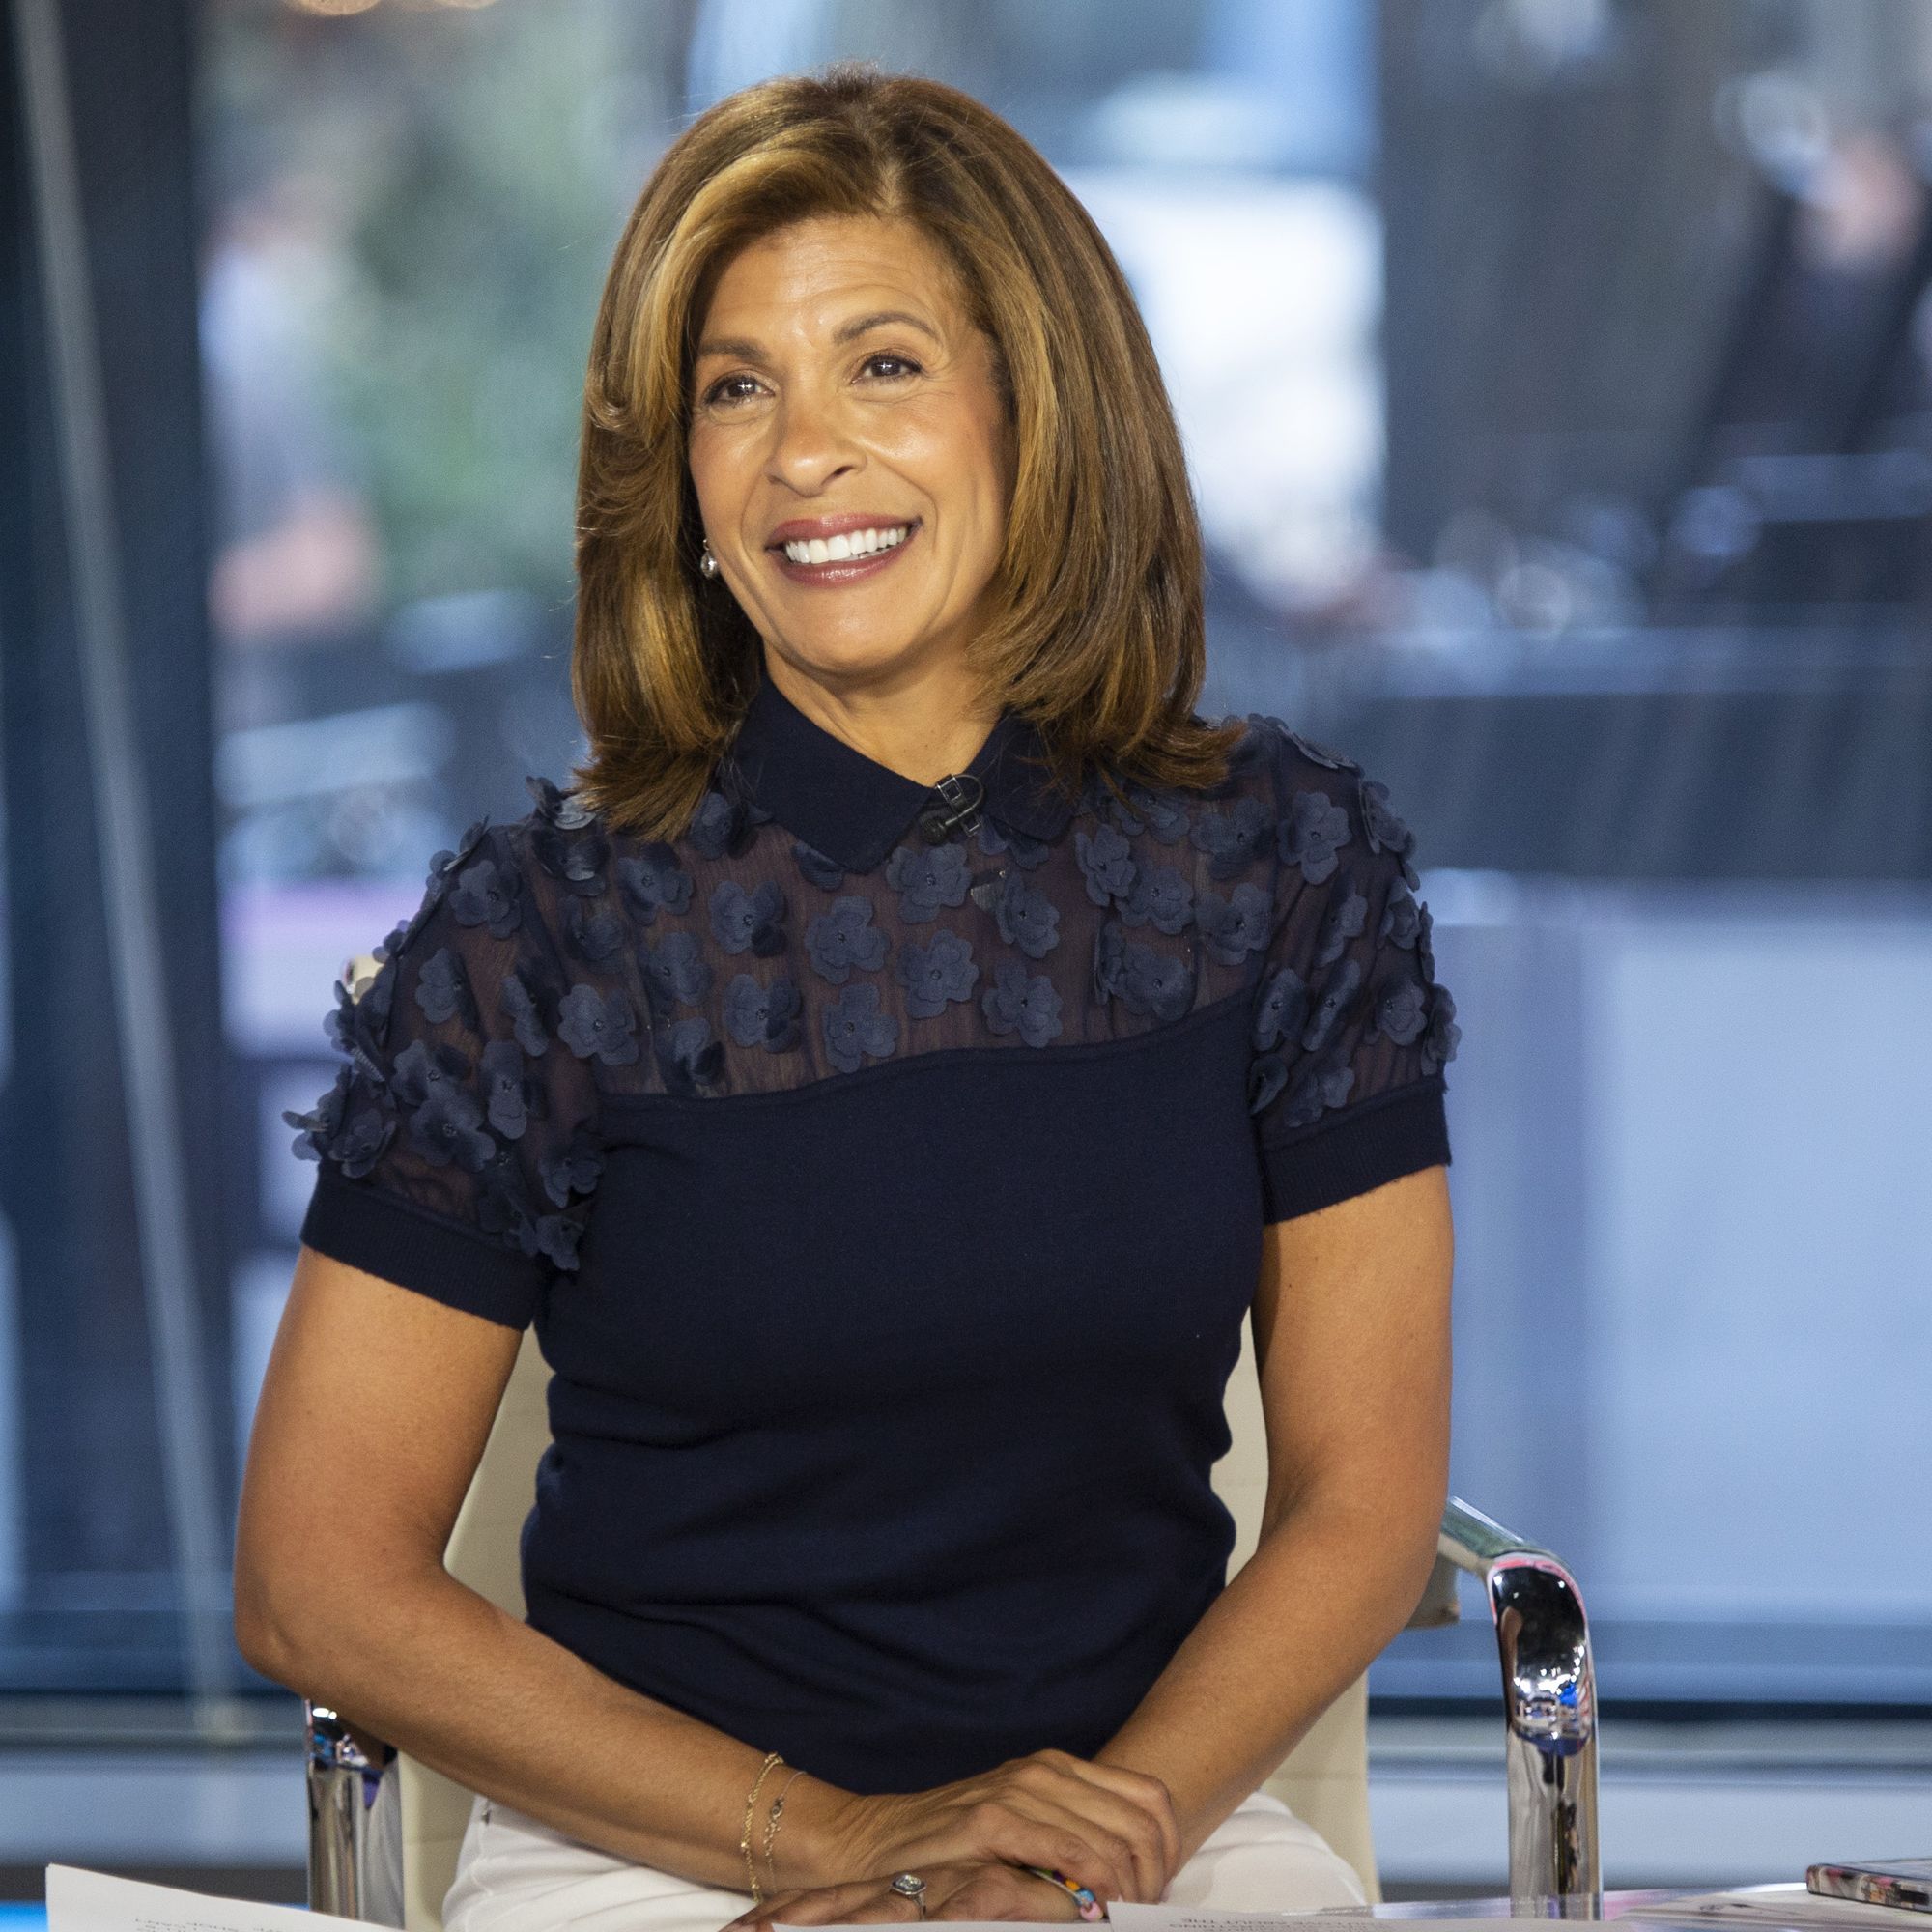 Fans Rally Around Hoda Kotb as the 'Today' Show Finally Explains Why She's Been Absent for Over a Week